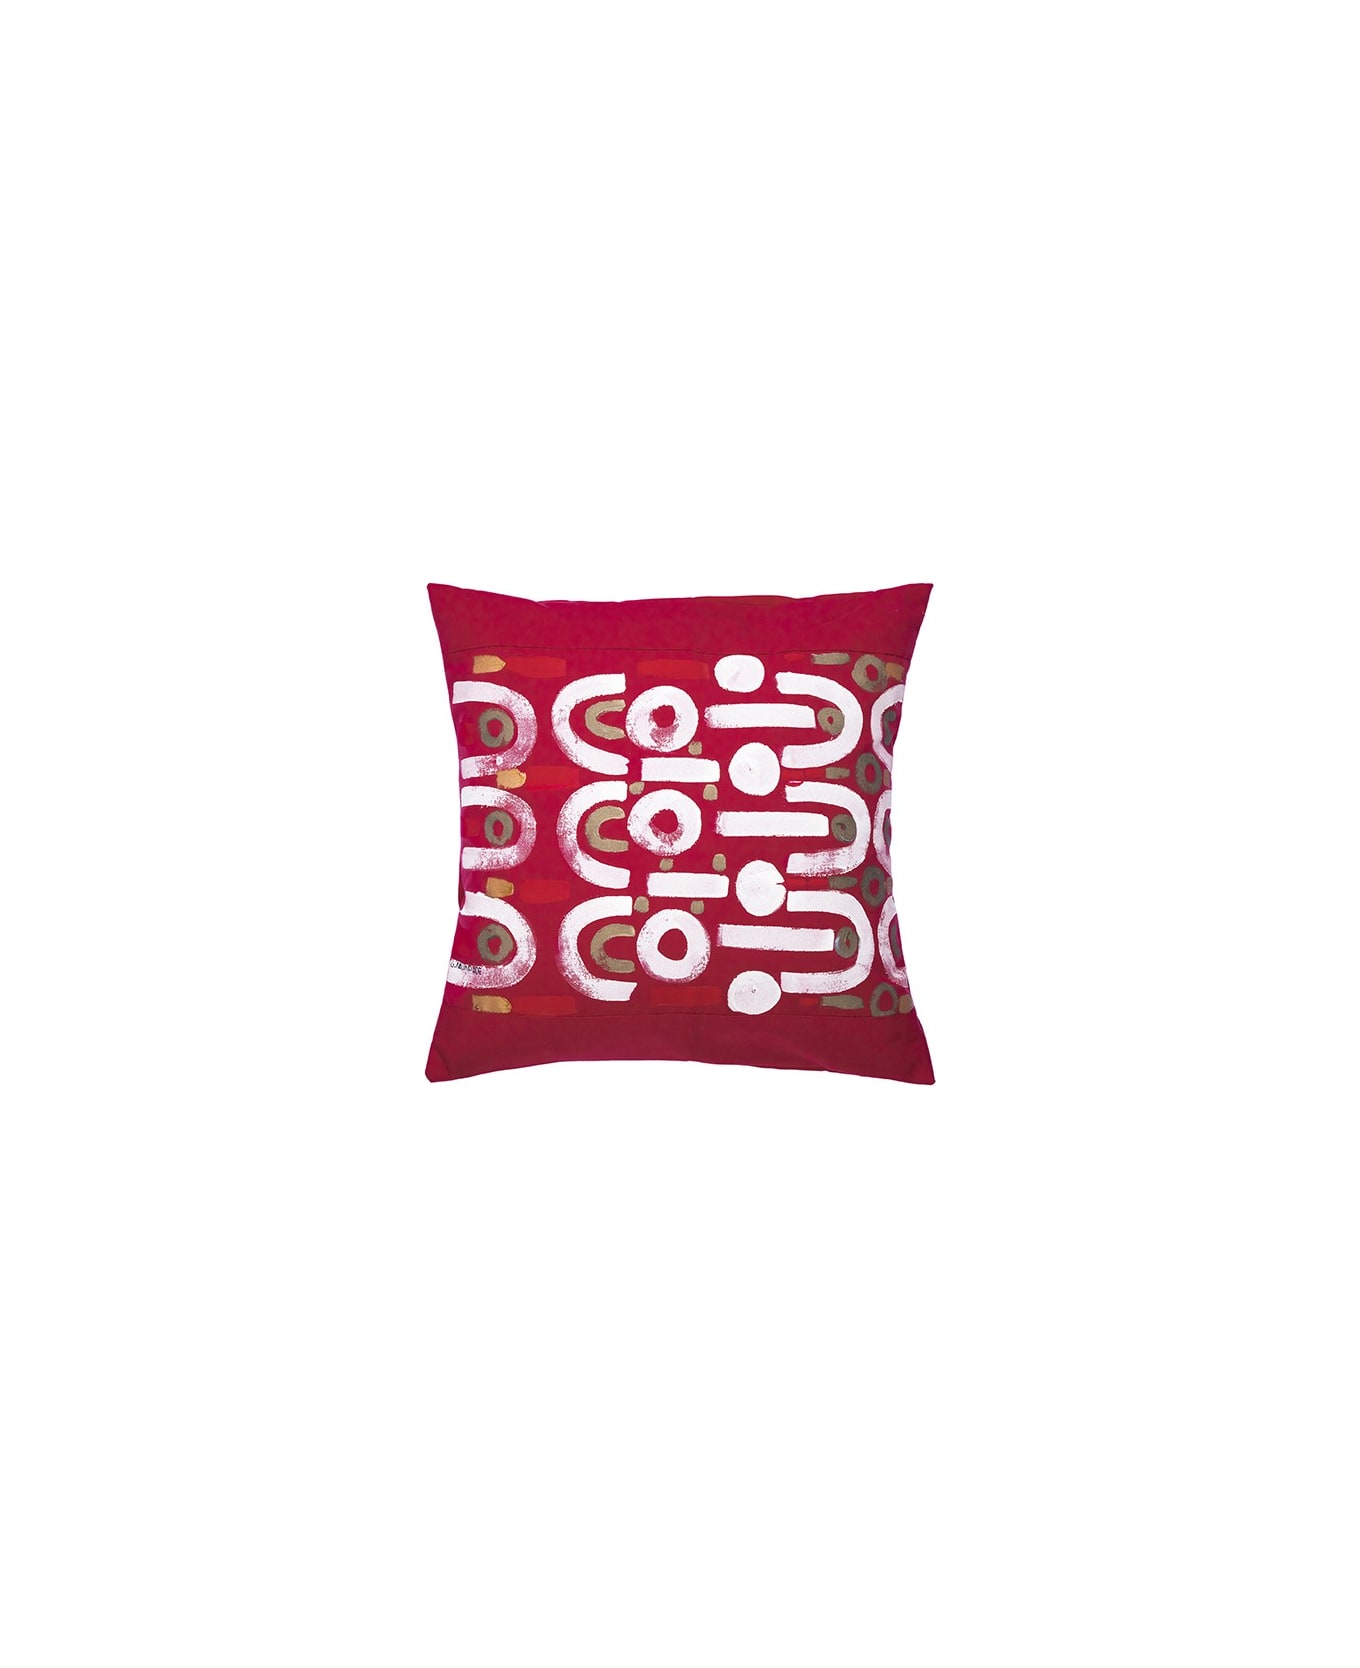 Le Botteghe su Gologone Acrylic Hand Painted Outdoor Cushion 60x60 cm - Dark Red クッション